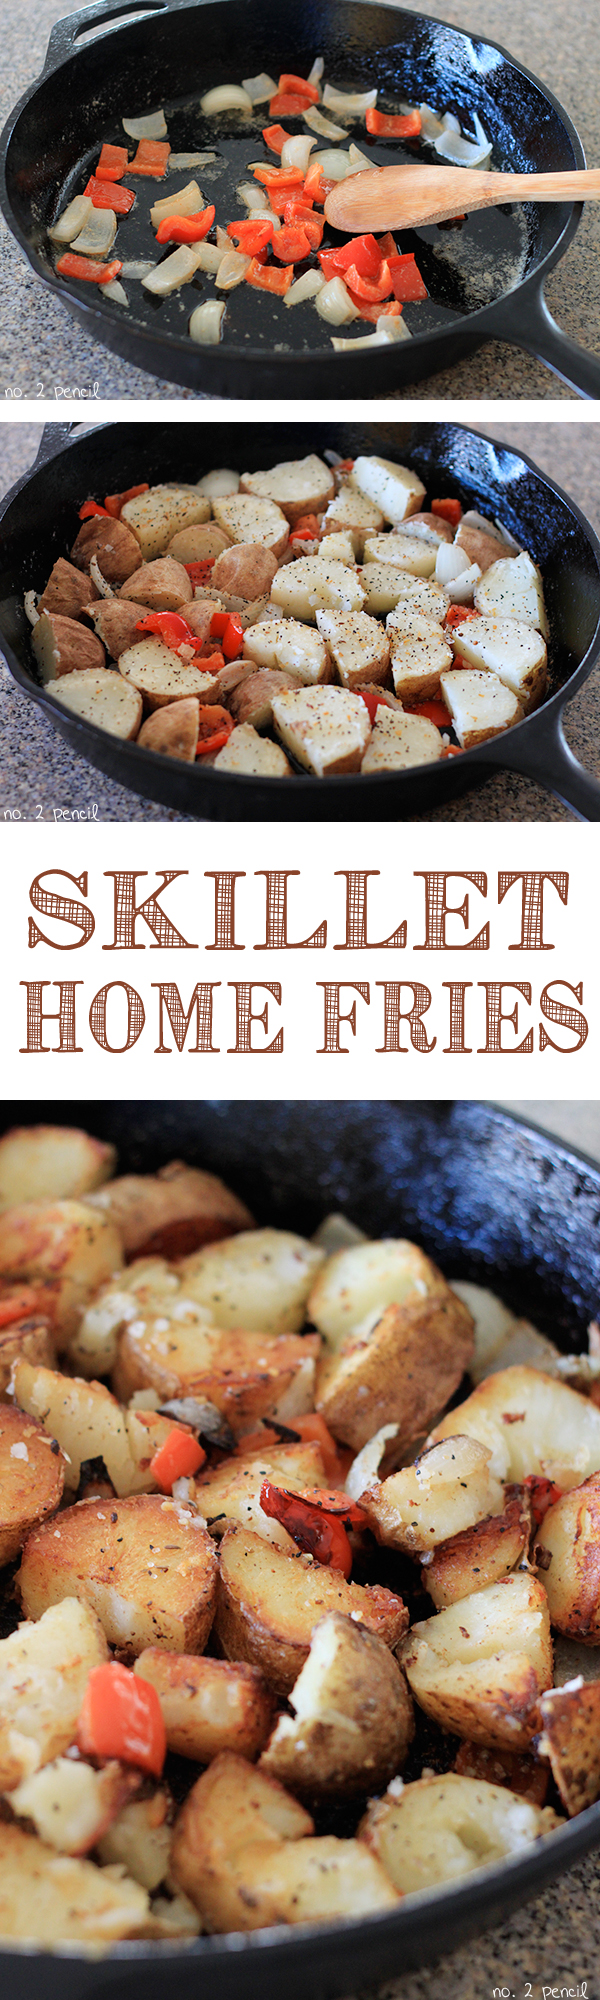 Skillet Home Fries - golden crispy breakfast potatoes. So good, you don't need ketchup!